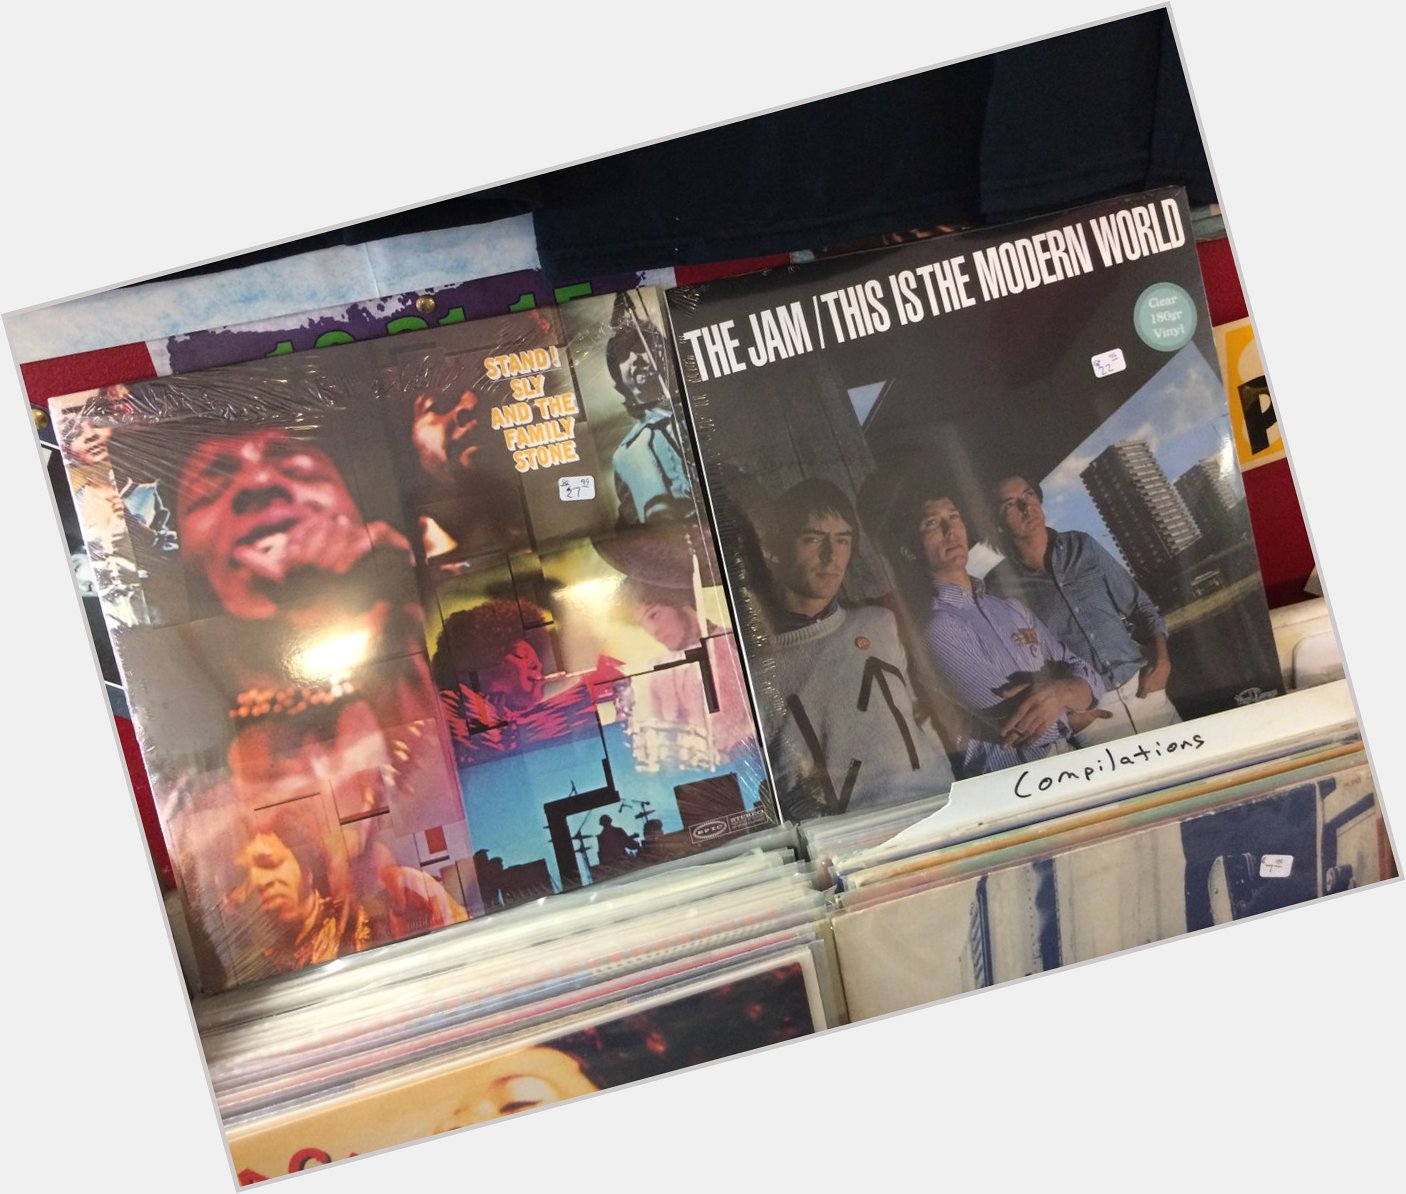 Happy Birthday to Greg Errico of Sly & The Family Stone & Bruce Foxton of the Jam 